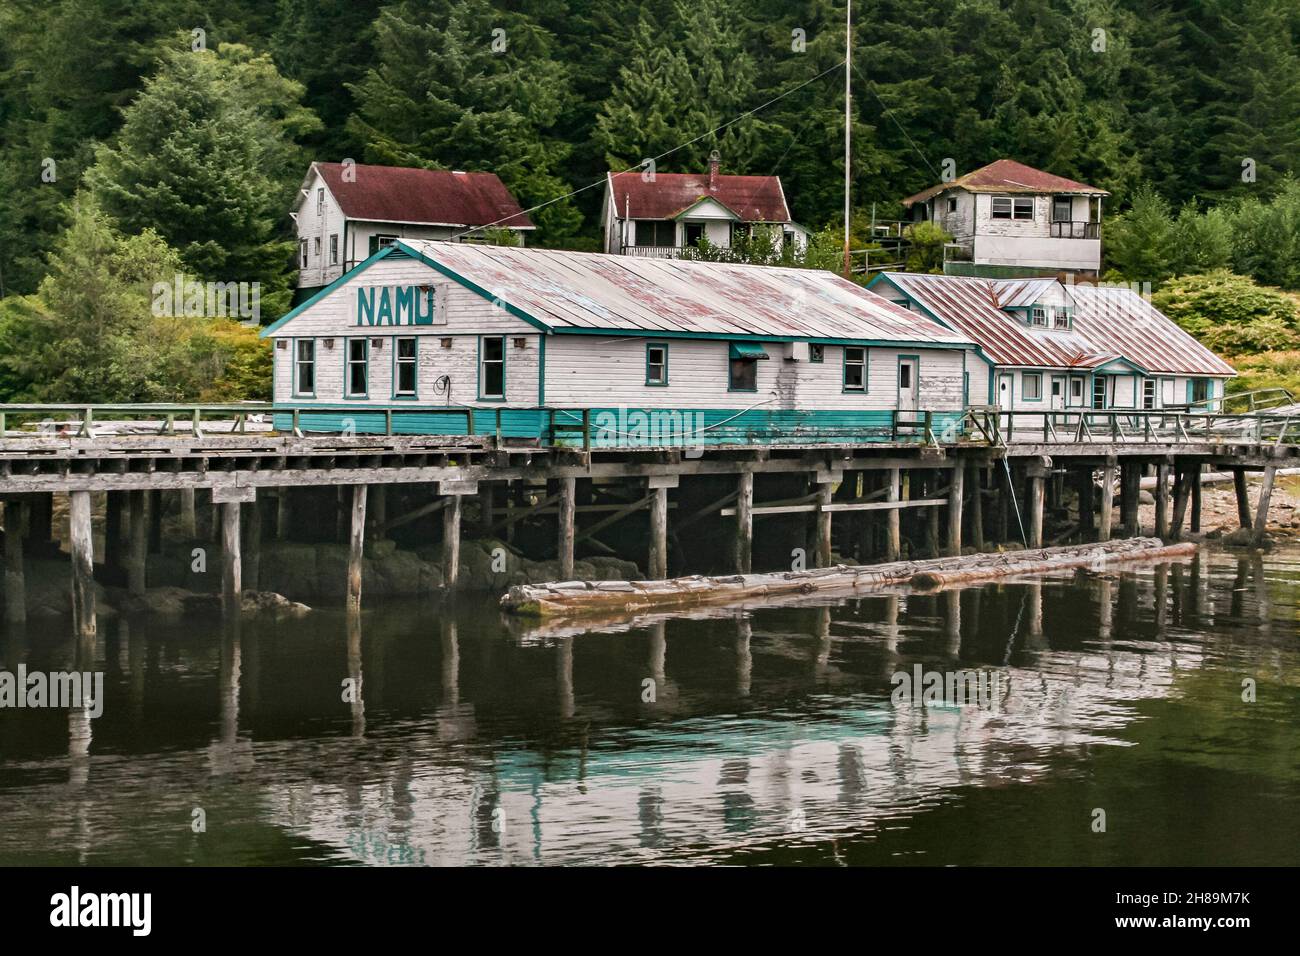 Abandoned houses and buildings stand on the shore and boardwalk at Namu, a historic former cannery and fish plant town on BC's Inside Passage (2009). Stock Photo